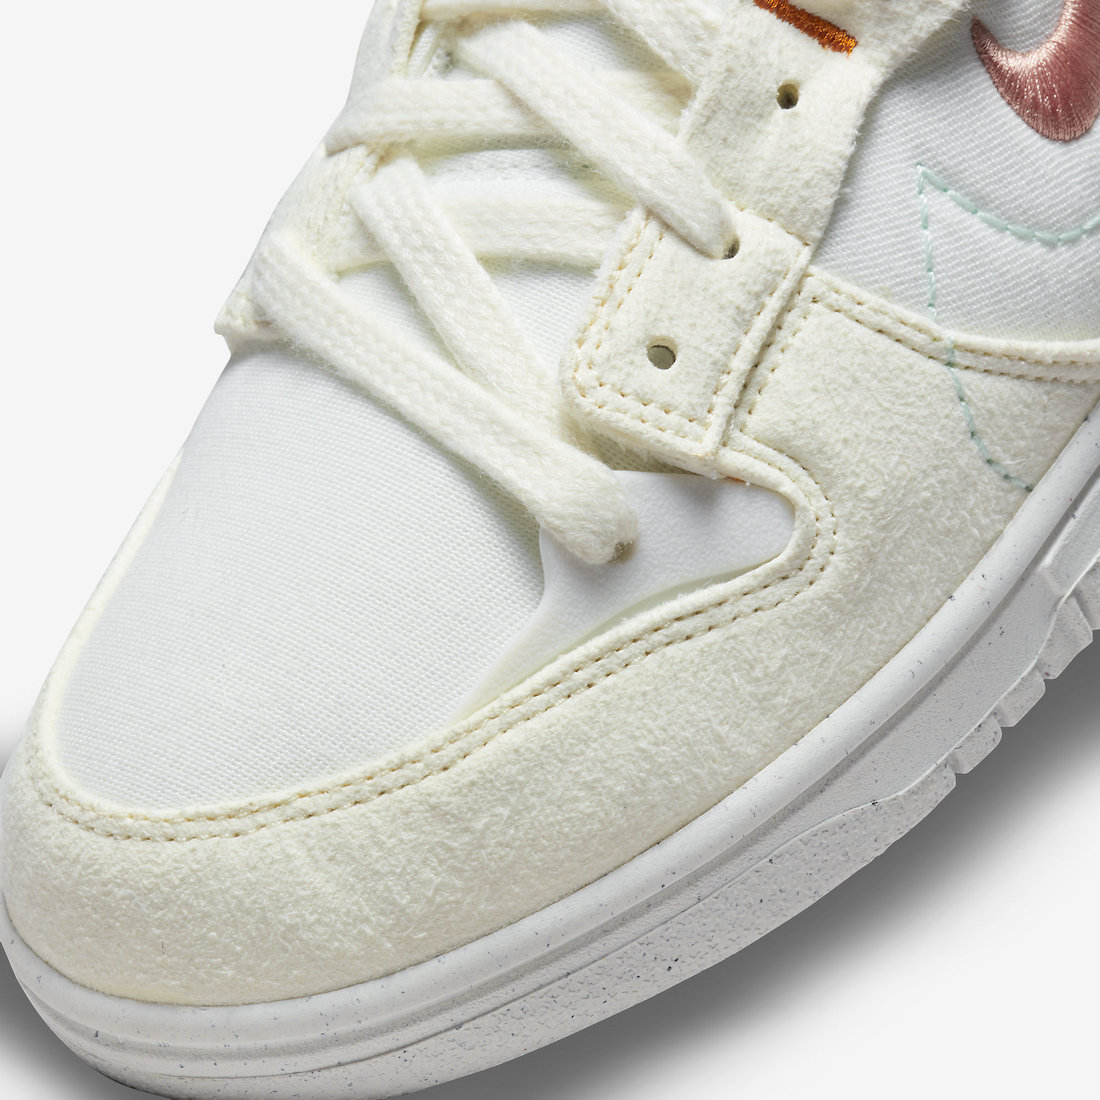 Nike Dunk Low Disrupt 2 Pale Ivory Light Madder Root Sail Venice DH4402-100 Release Date Info